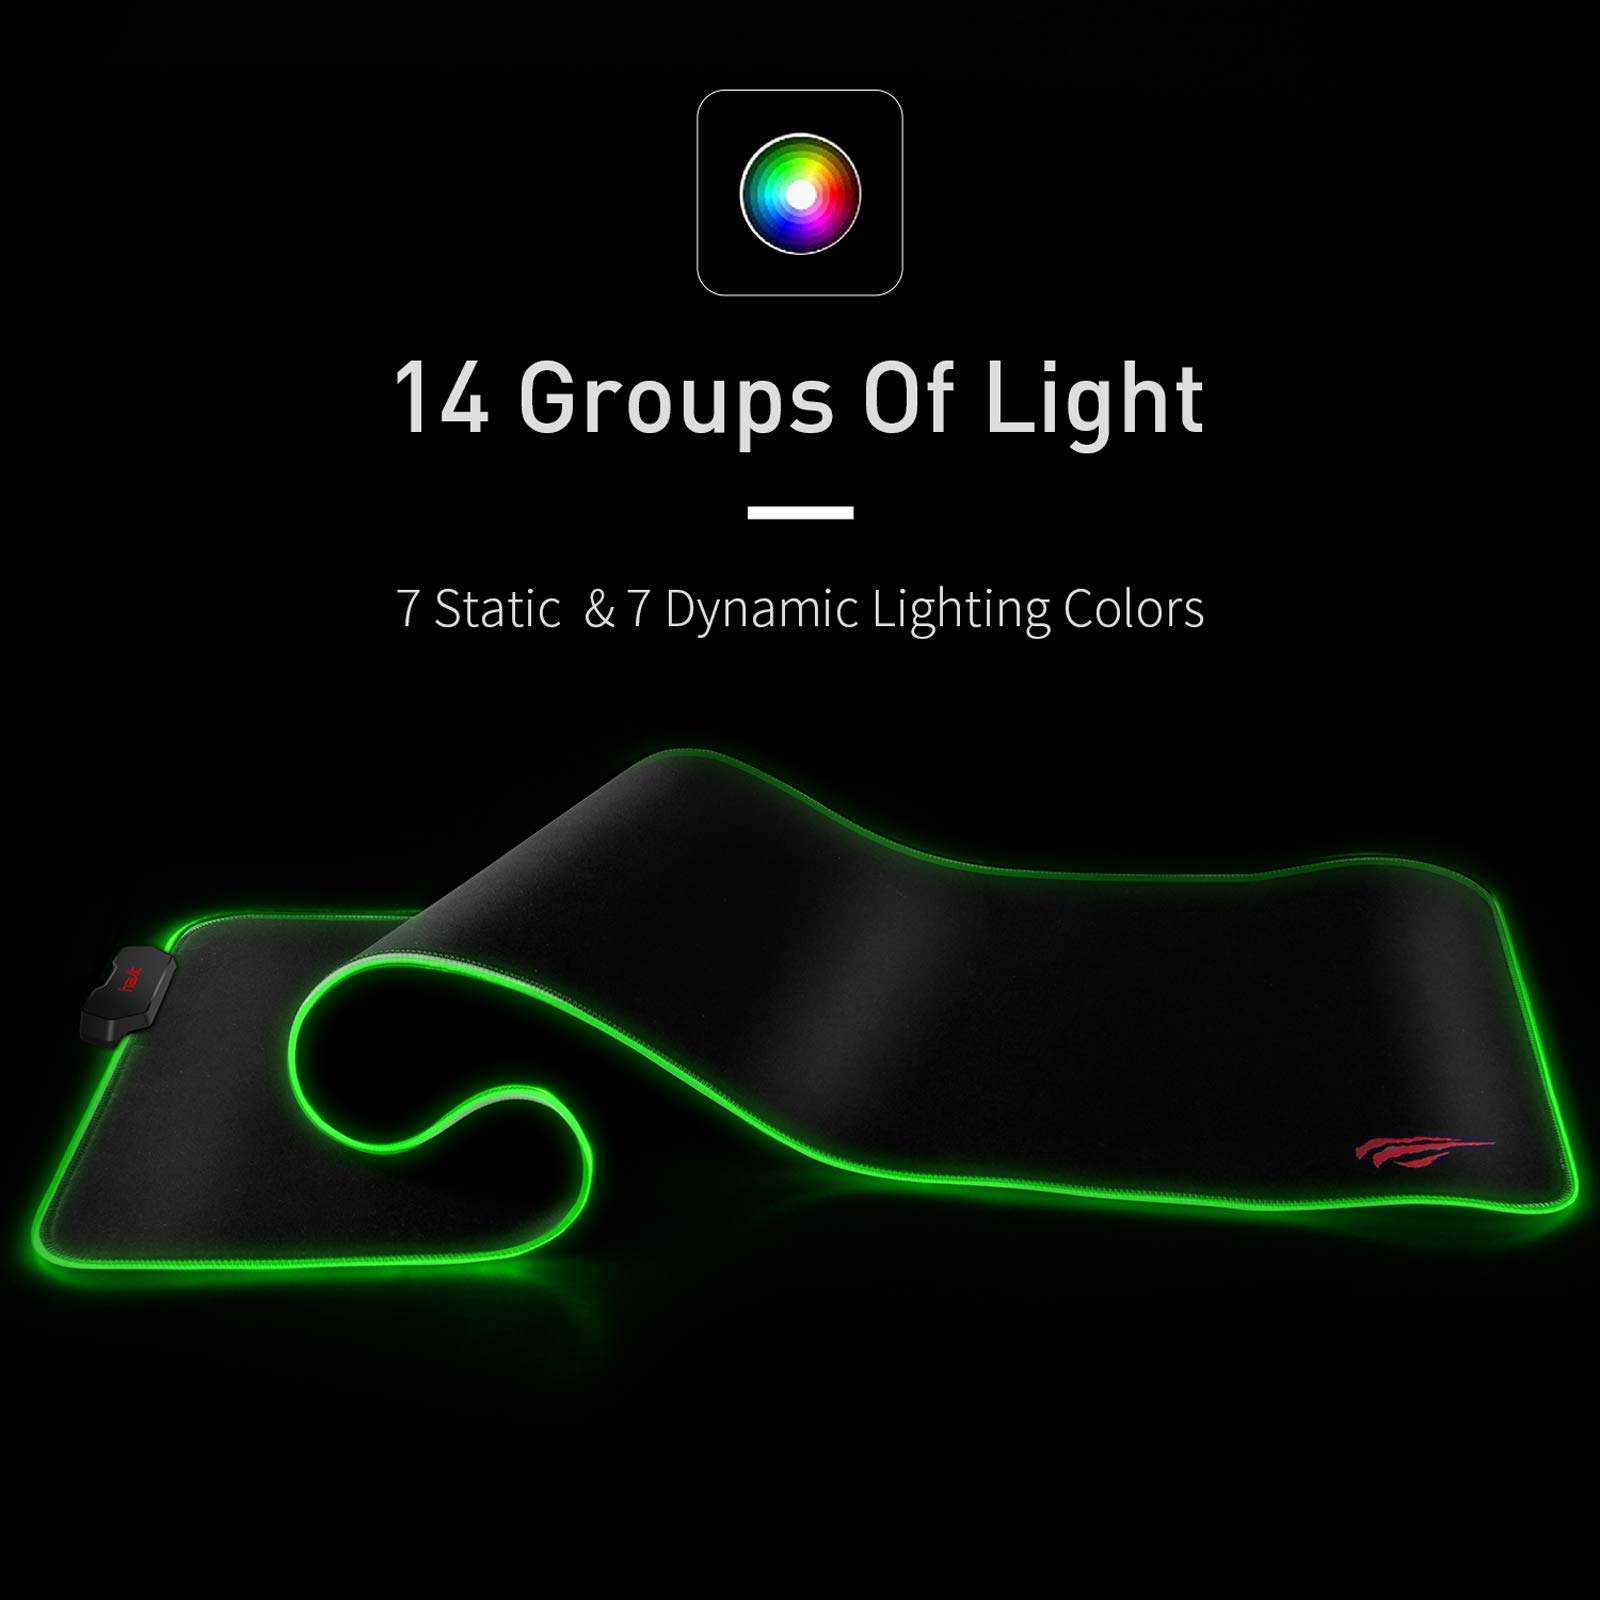 havit RGB Gaming Mouse Pad Soft Non-Slip Rubber Base Mouse Mat for Laptop Computer PC Games (27.5 X 11.2 X 0.11 inches, Black)